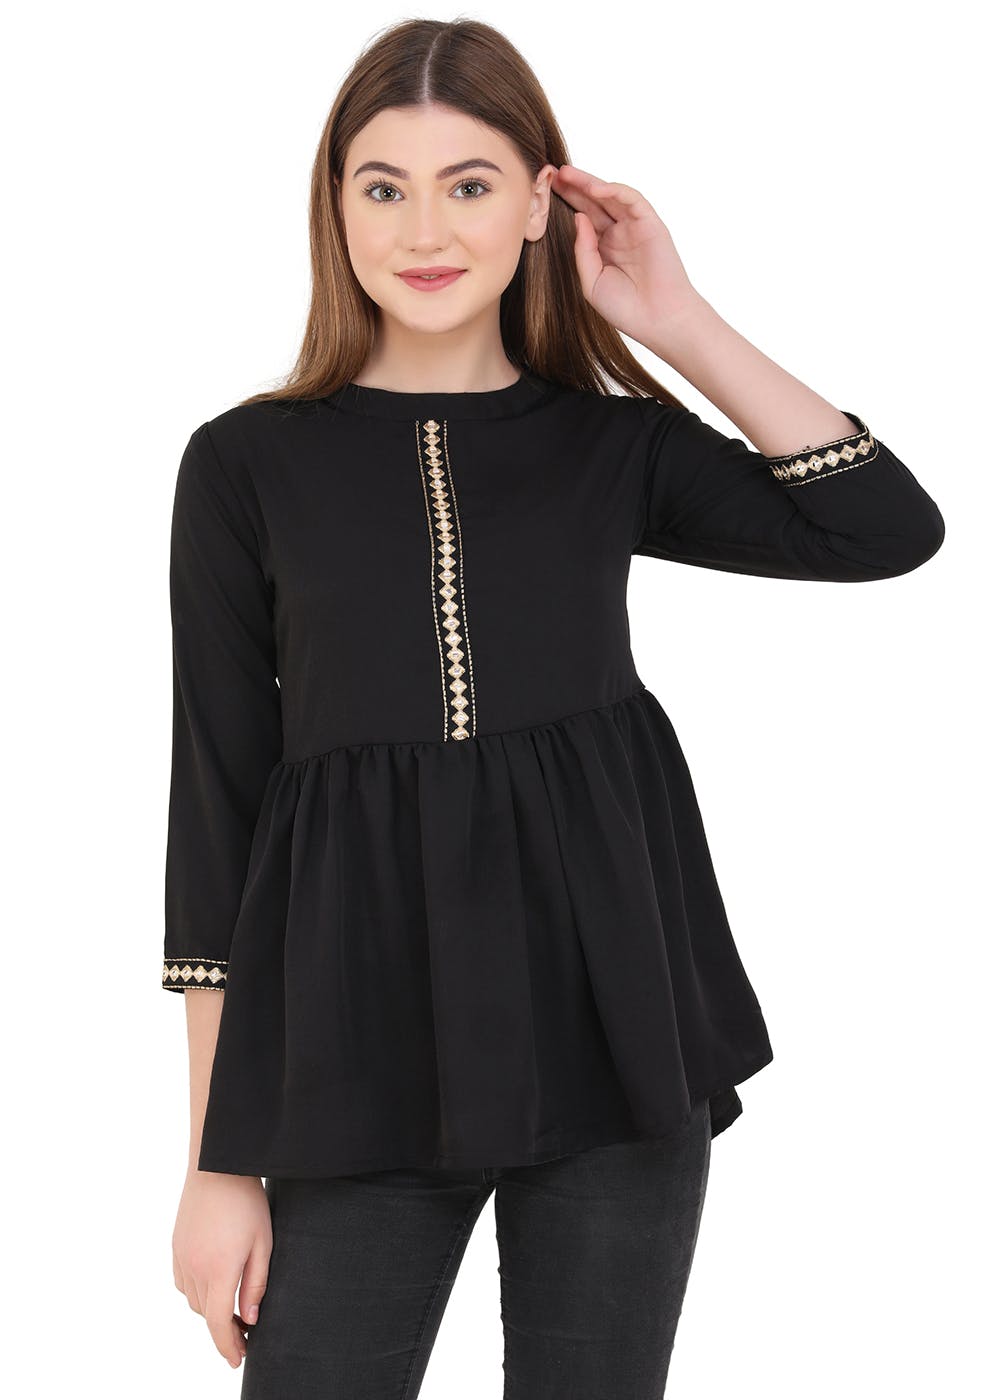 Contrast Embroidery Patch Detail Black Peplum Top